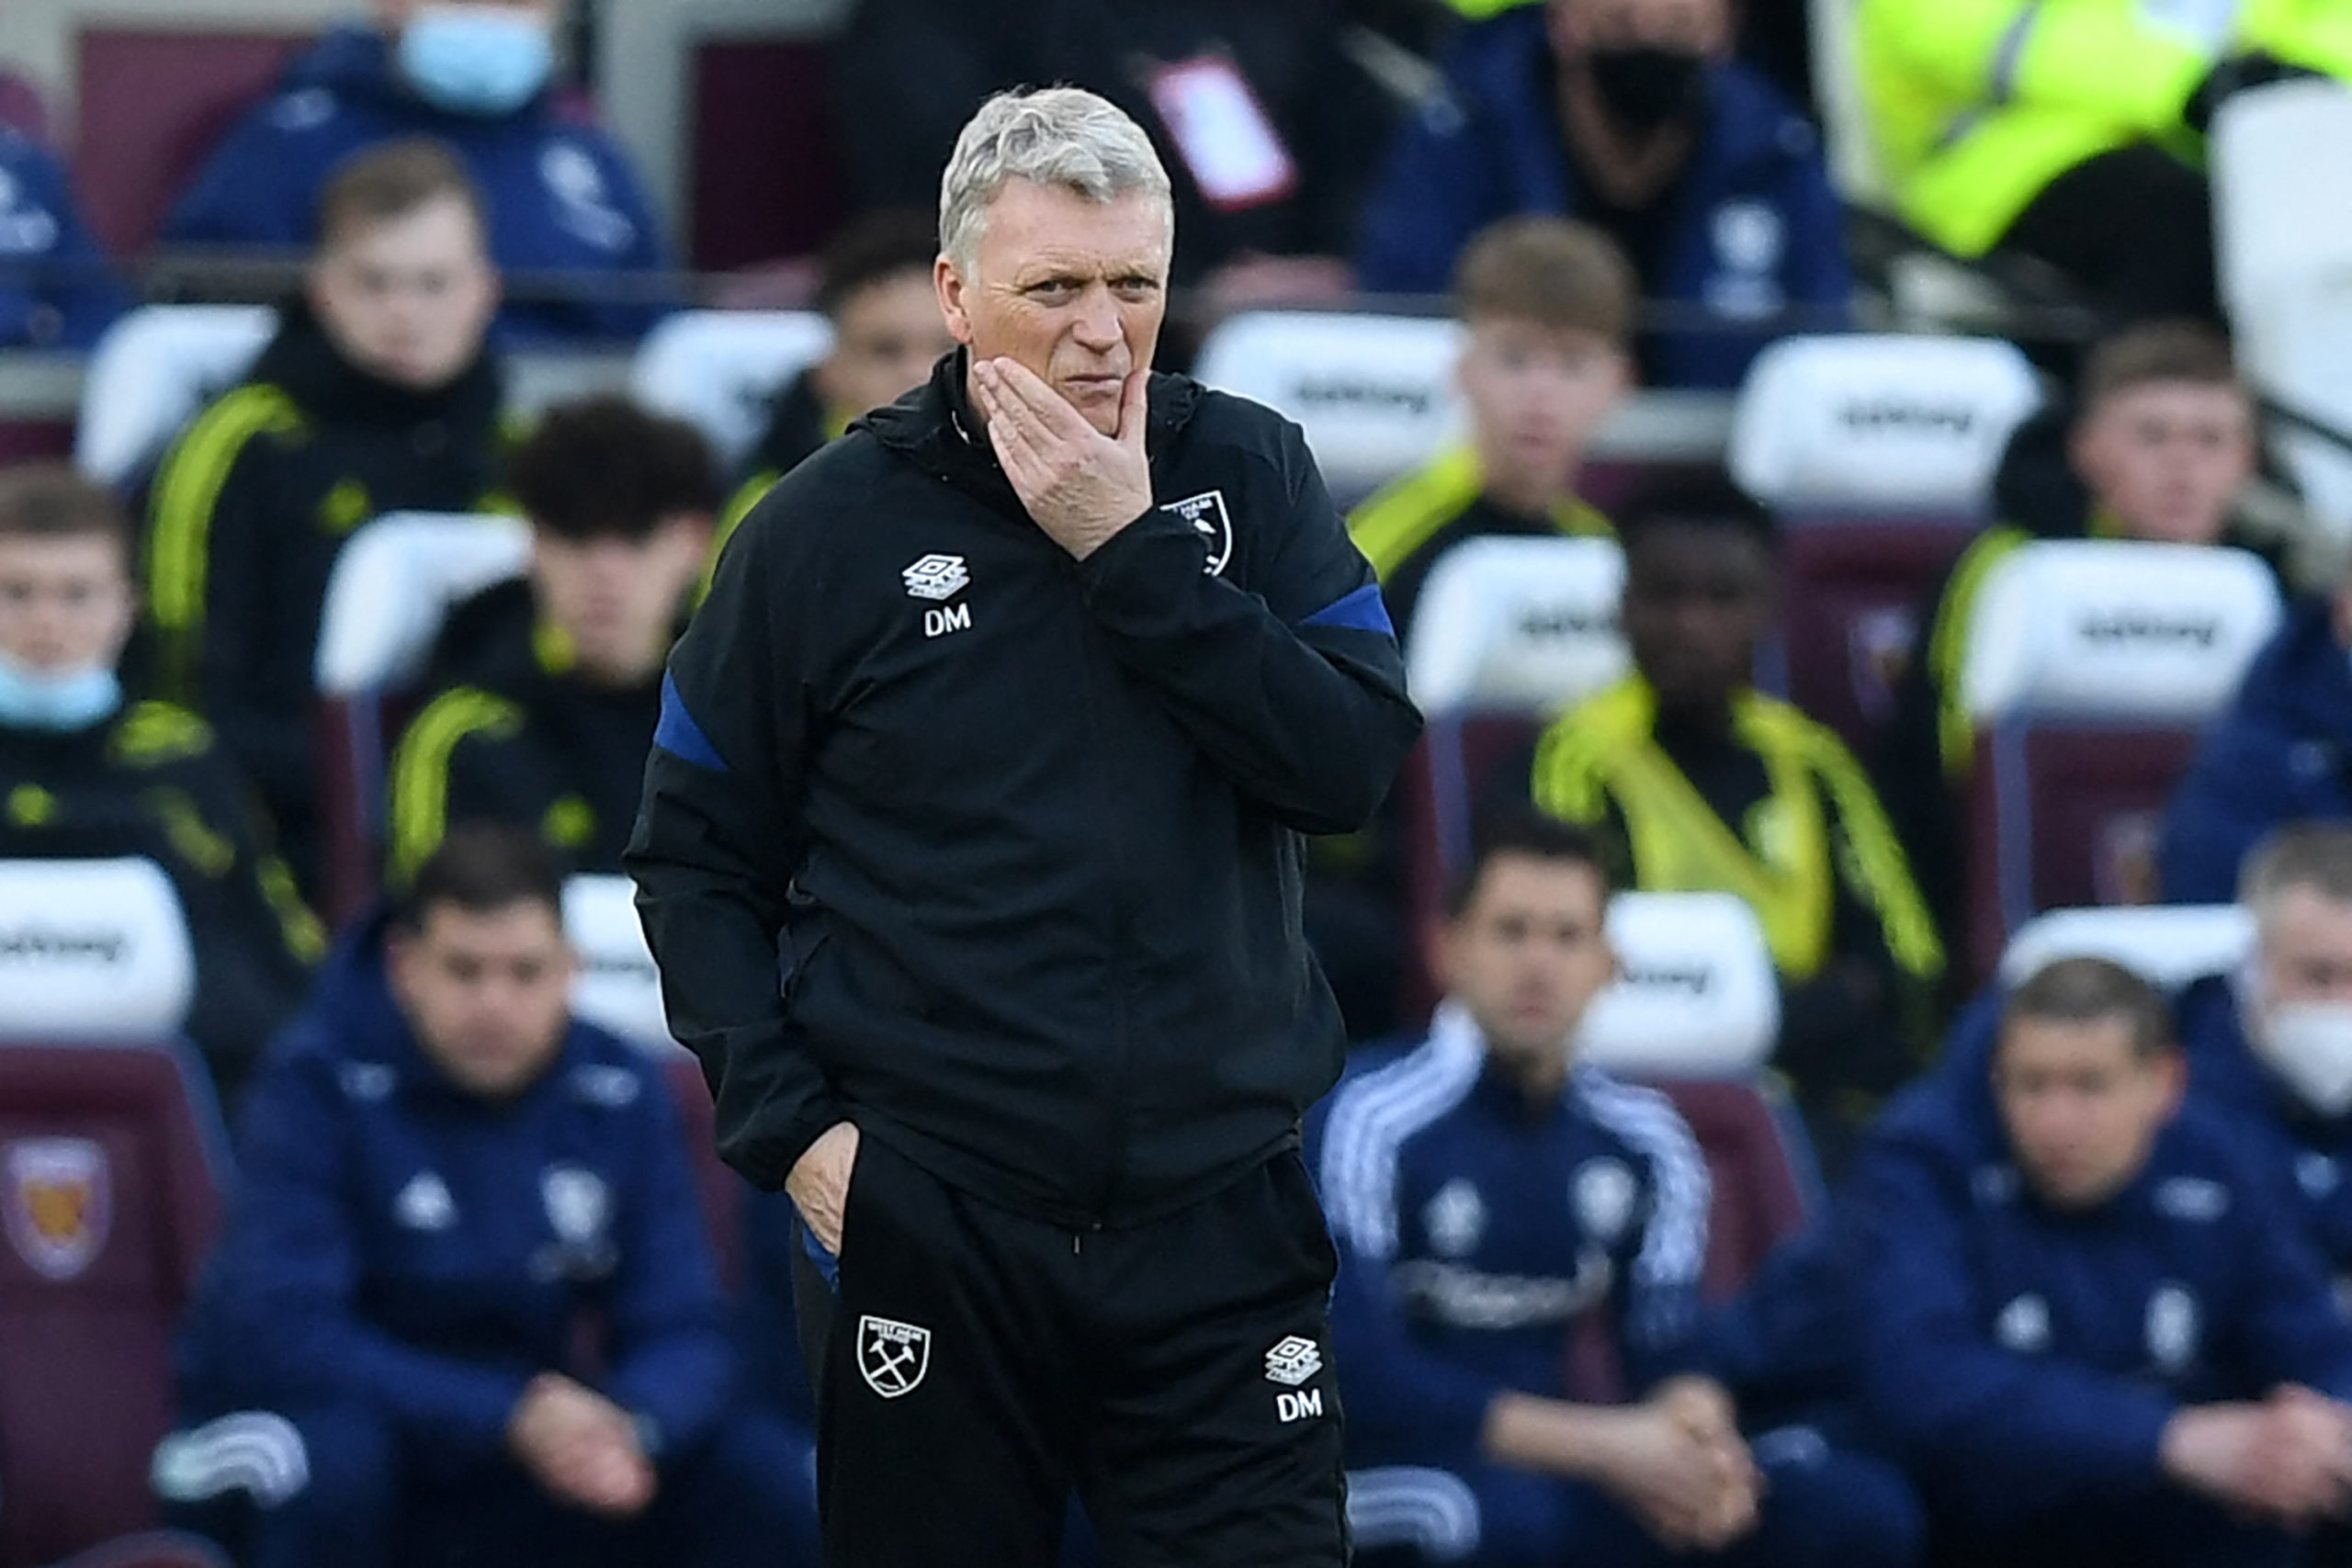 West Ham January transfer window update: David Moyes looks set to miss out on one of his key striker targets